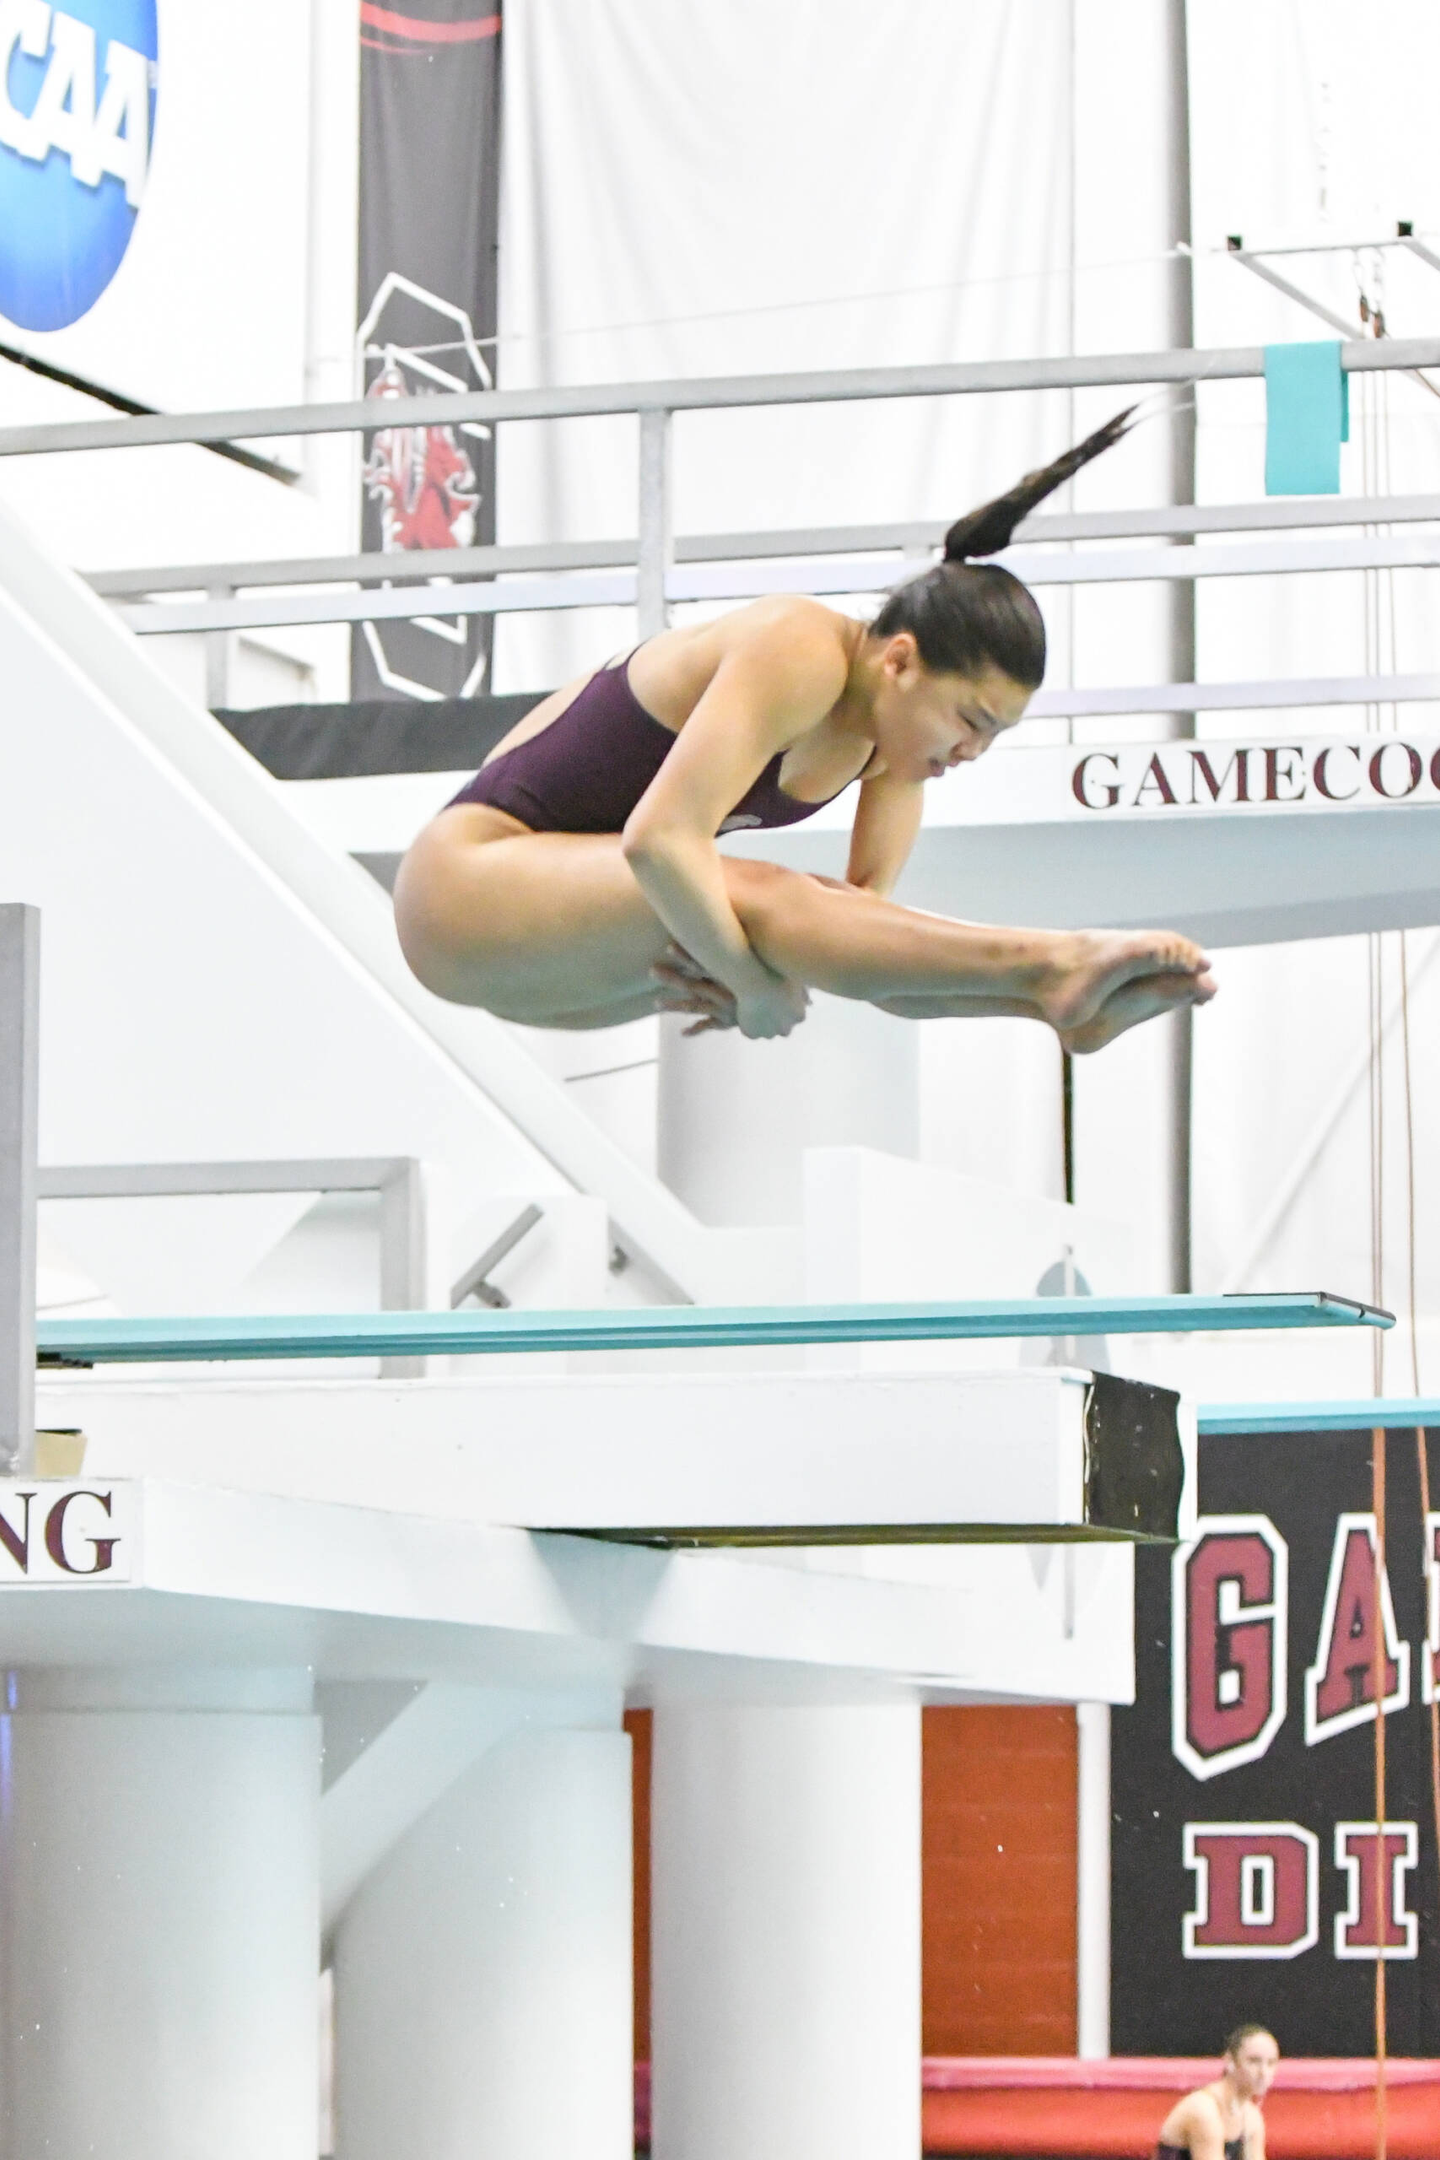 Three Gamecocks Compete in Three Meter Finals